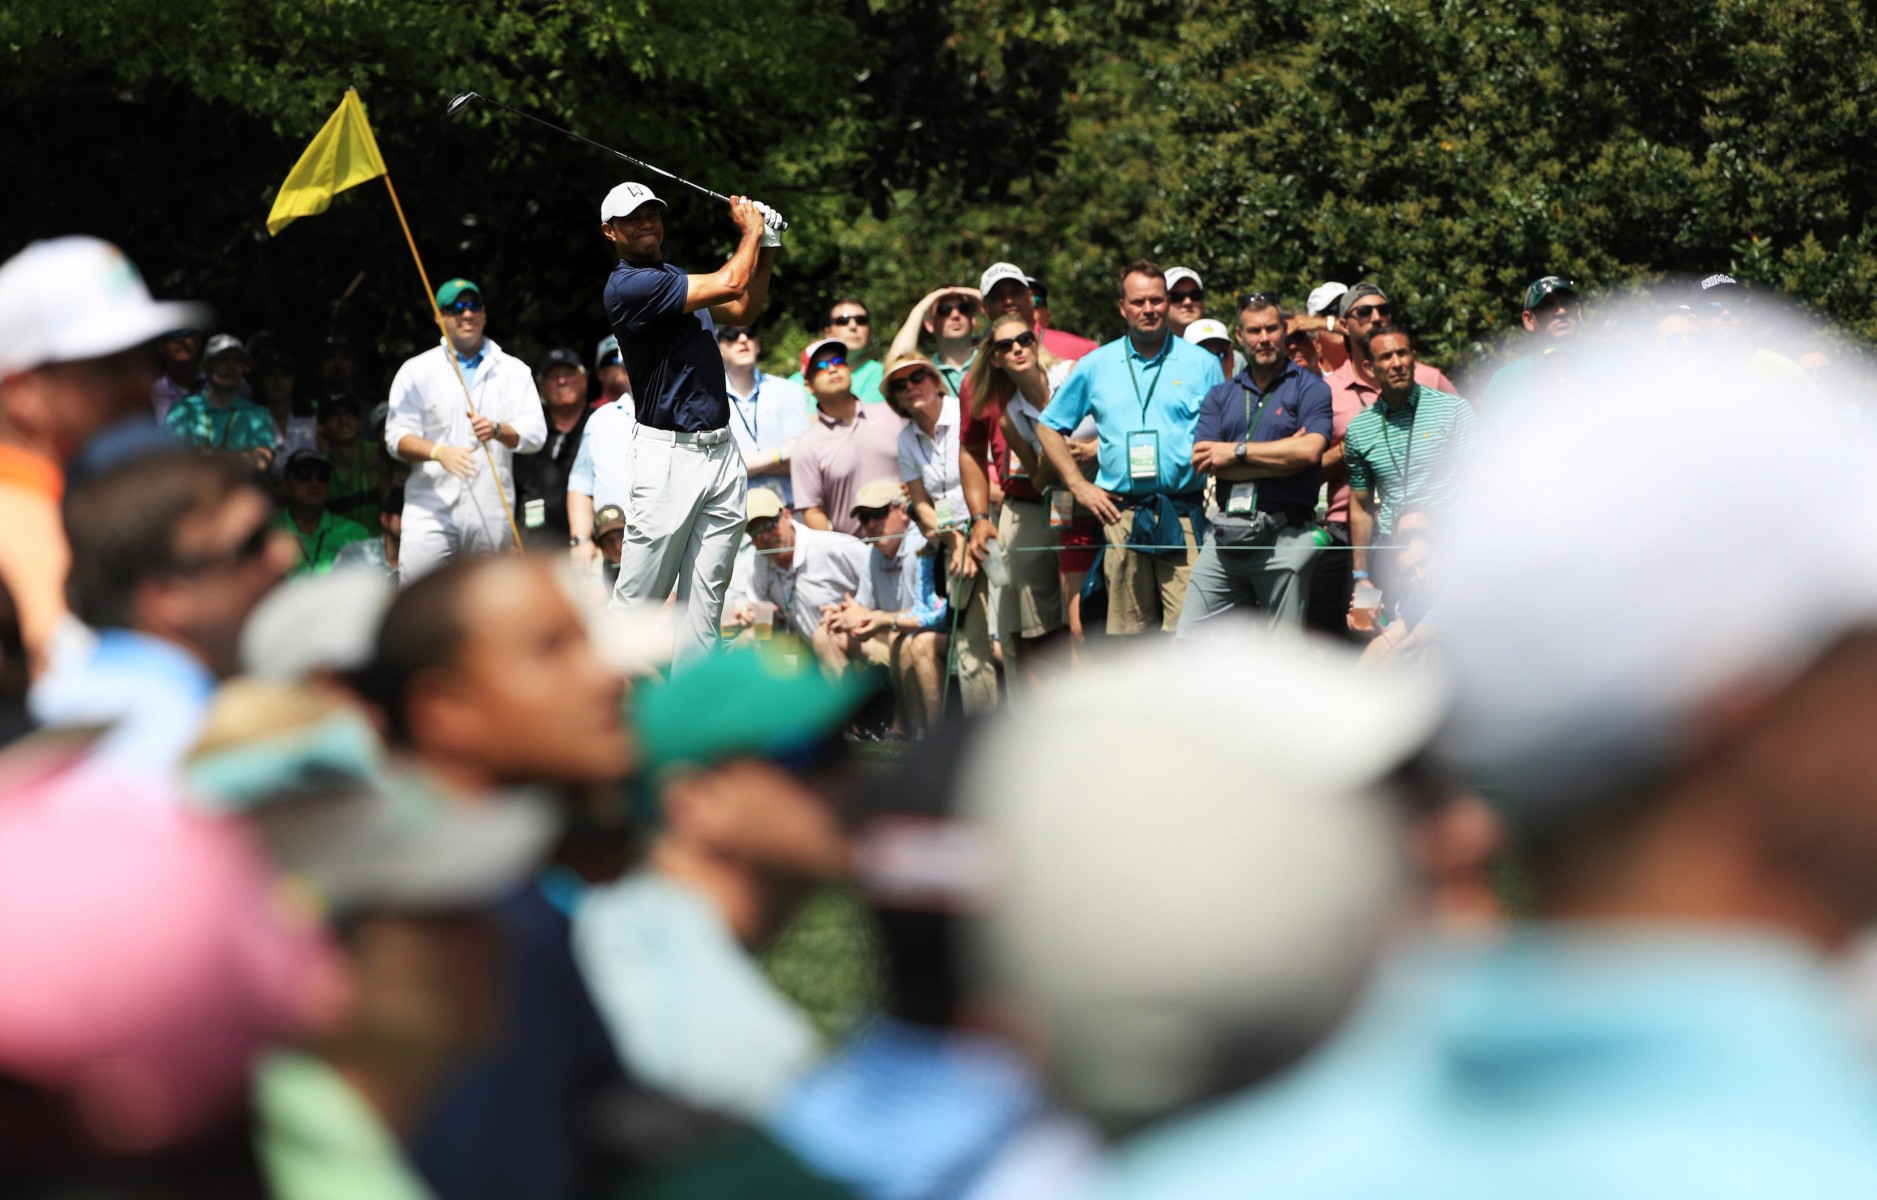 , Masters 2020 golf tournament postponed due to coronavirus crisis as sporting schedule is decimated